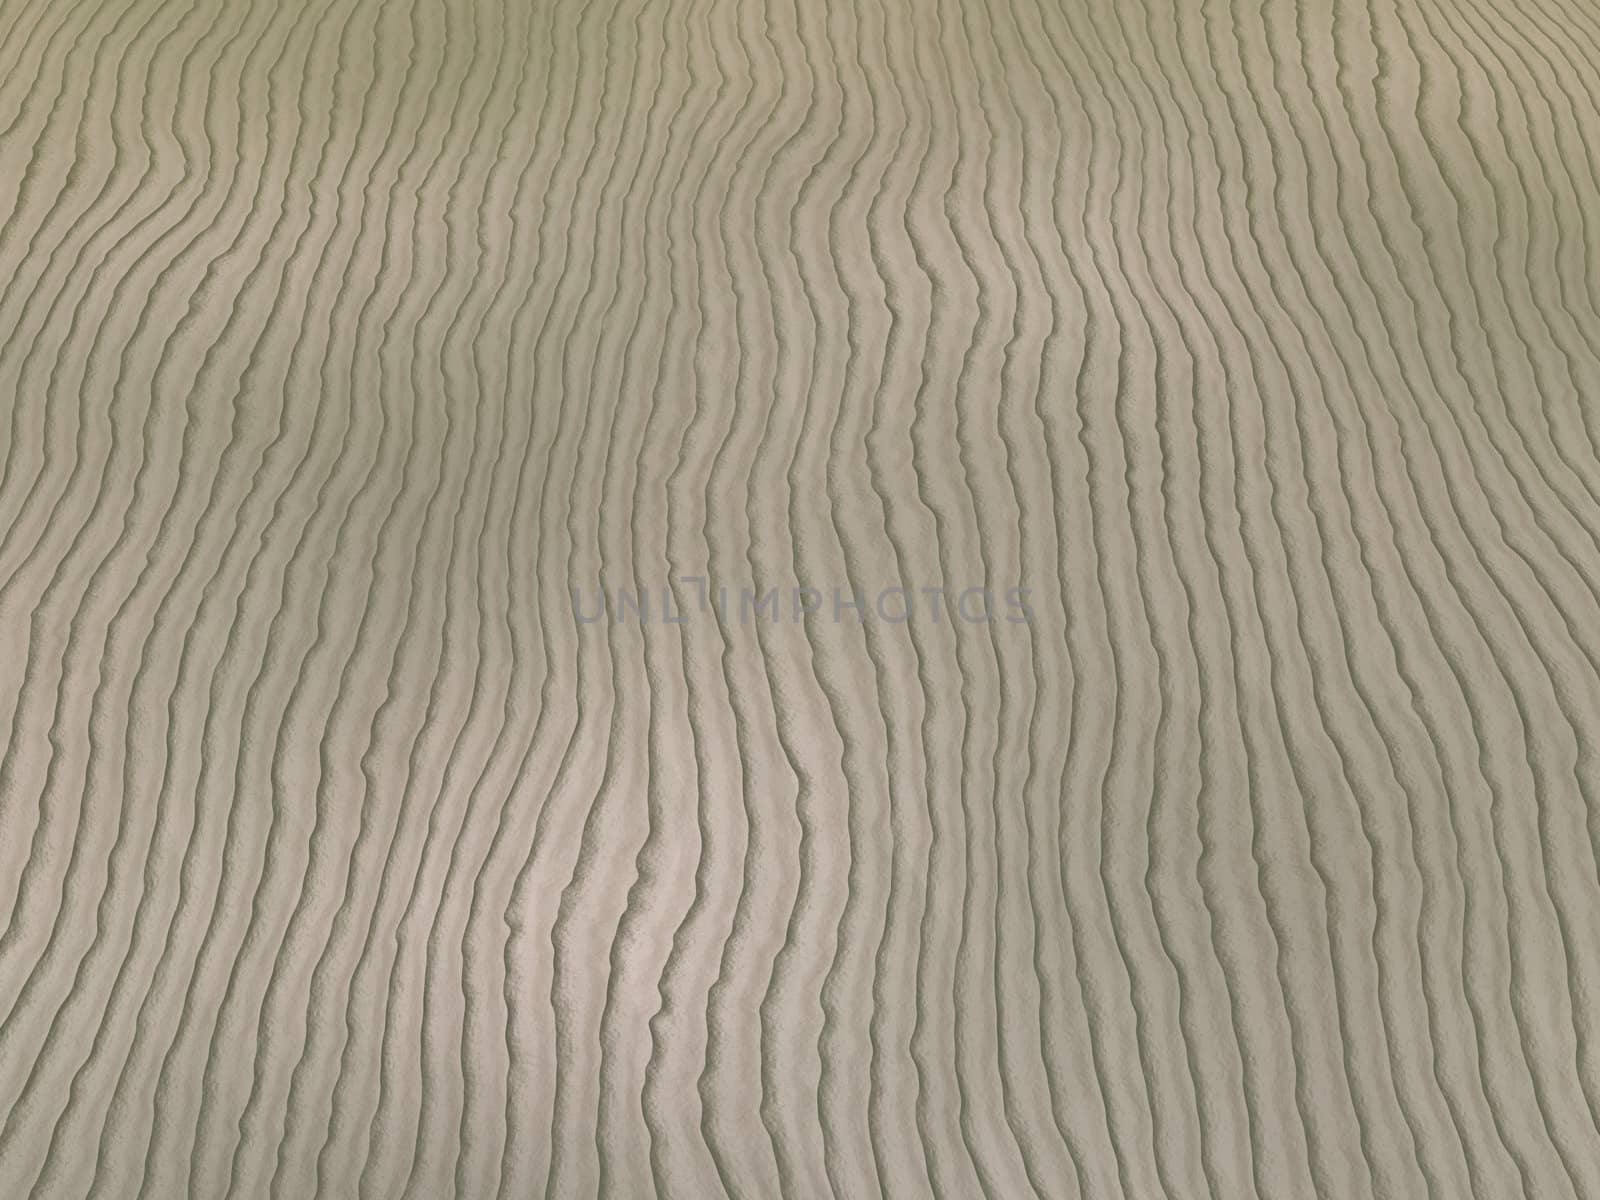 A seafloor texture depicting the sand at the bottom of the ocean.